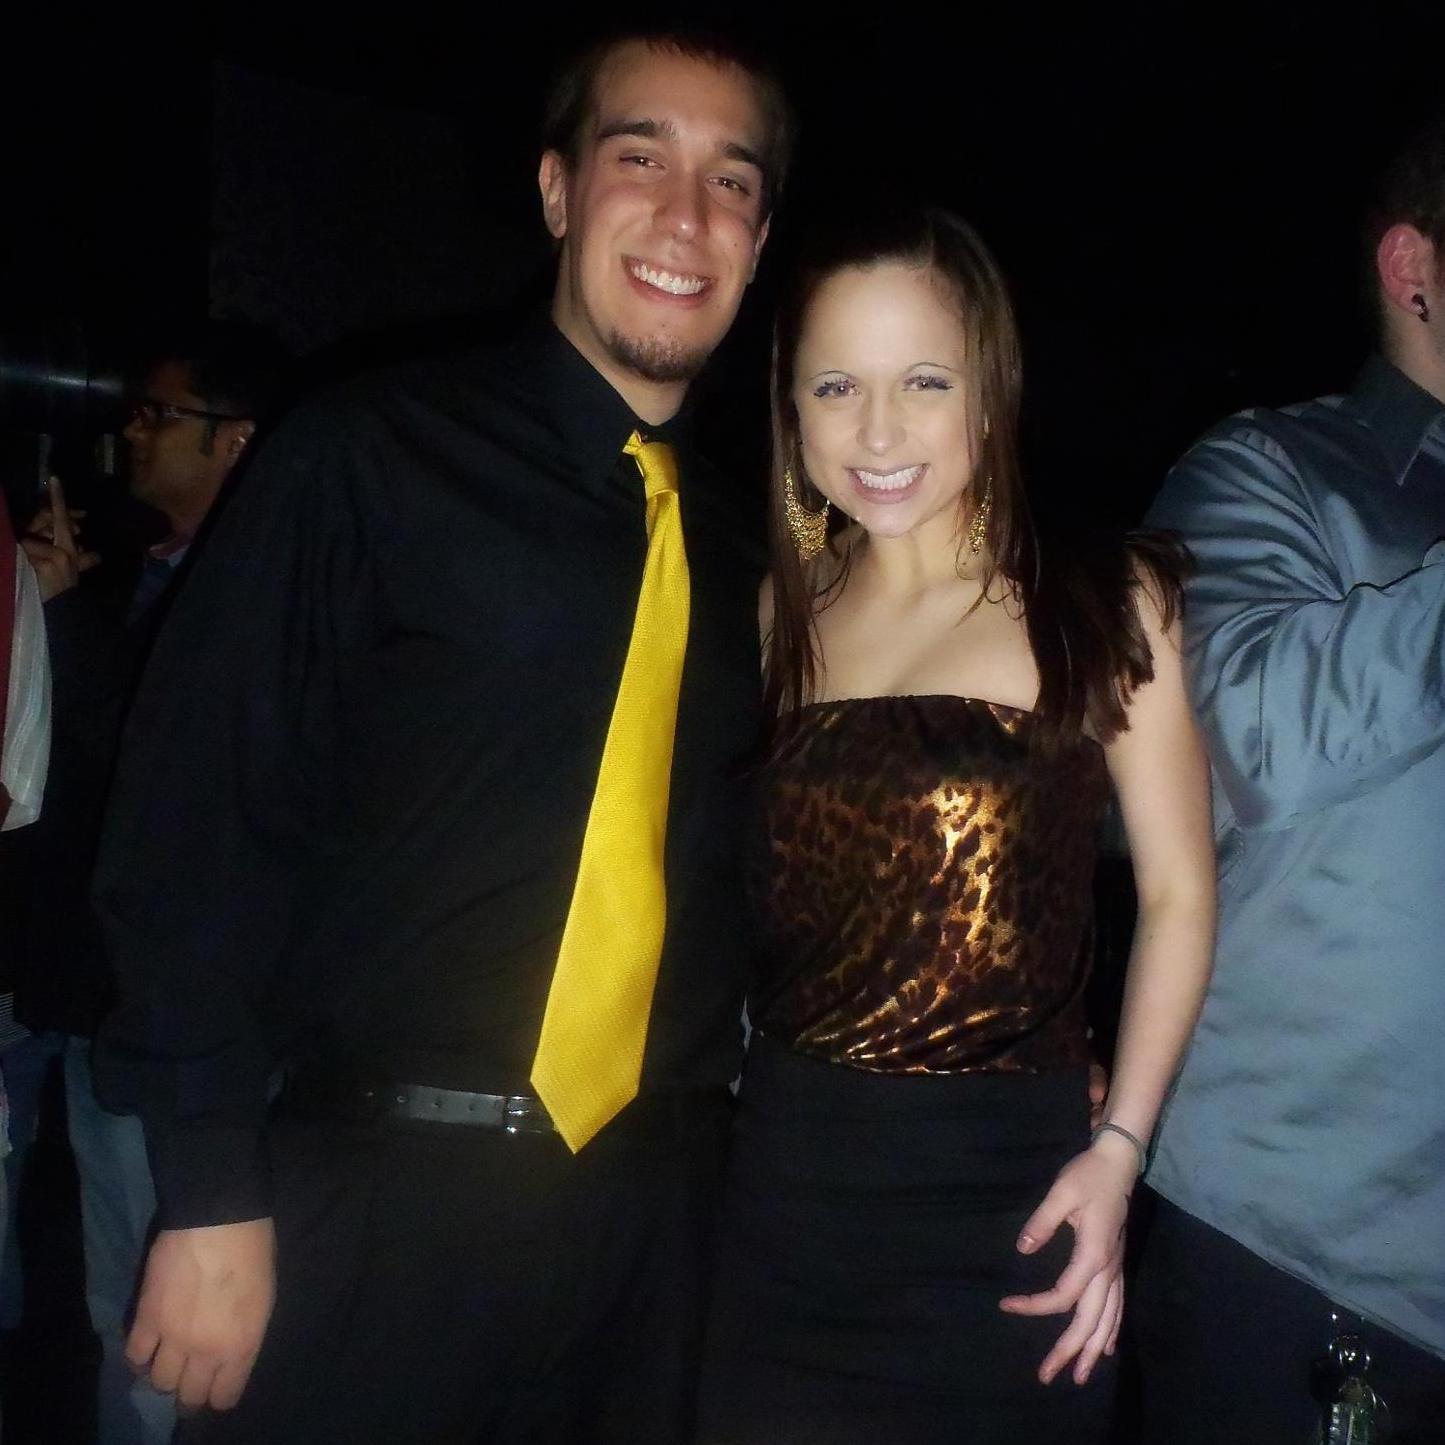 Our first date at Pearl Nightclub was on Friday, January 20, 2012 (our first date and our first picture together)